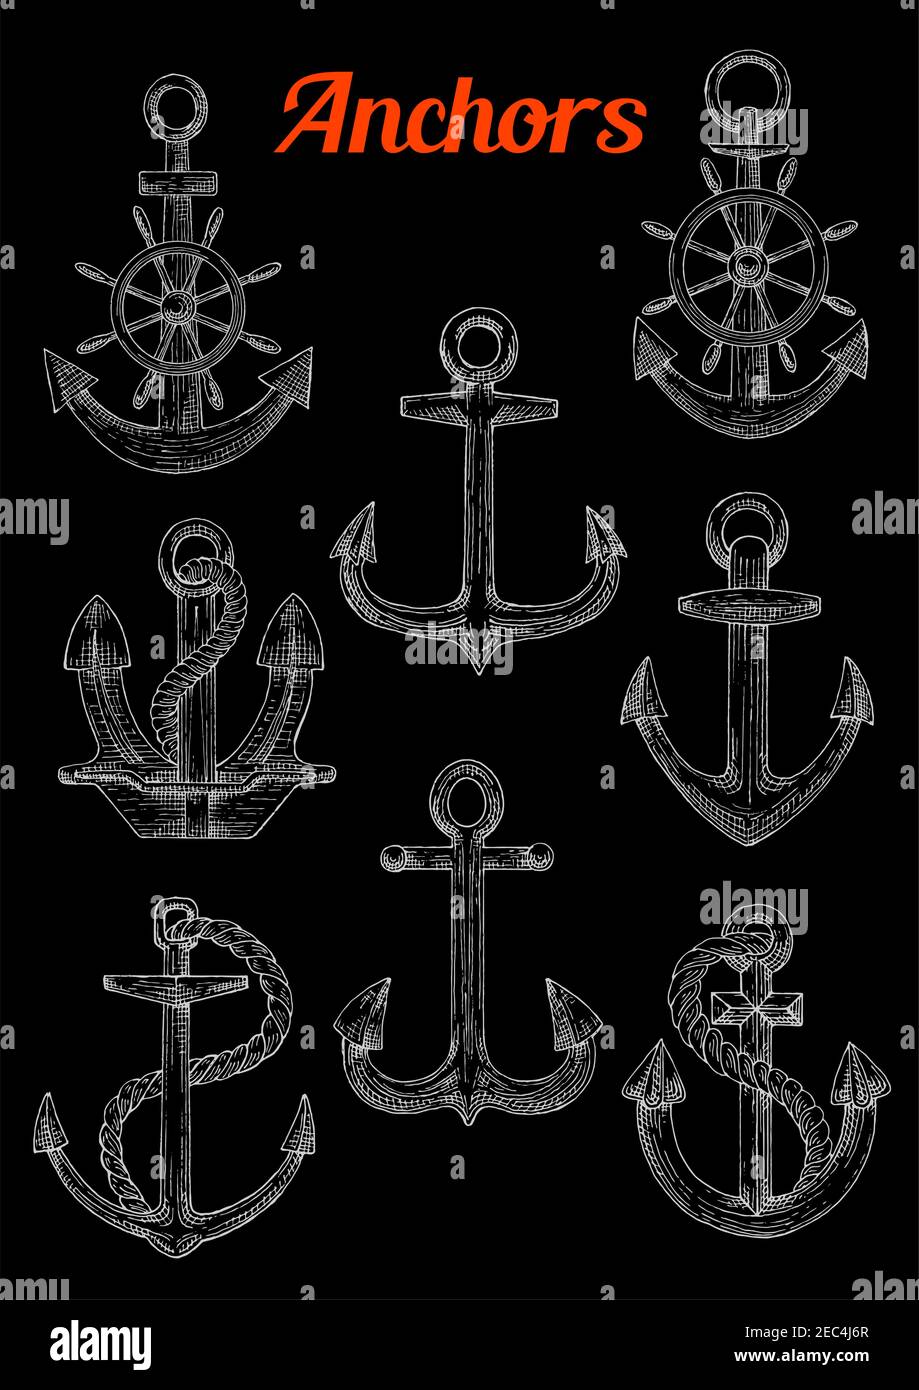 sketch of stockless admiralty or fisherman anchors with twined rope and steering ship s or boat s wheel can be used as naval or nautical symbol mar 2EC4J6R